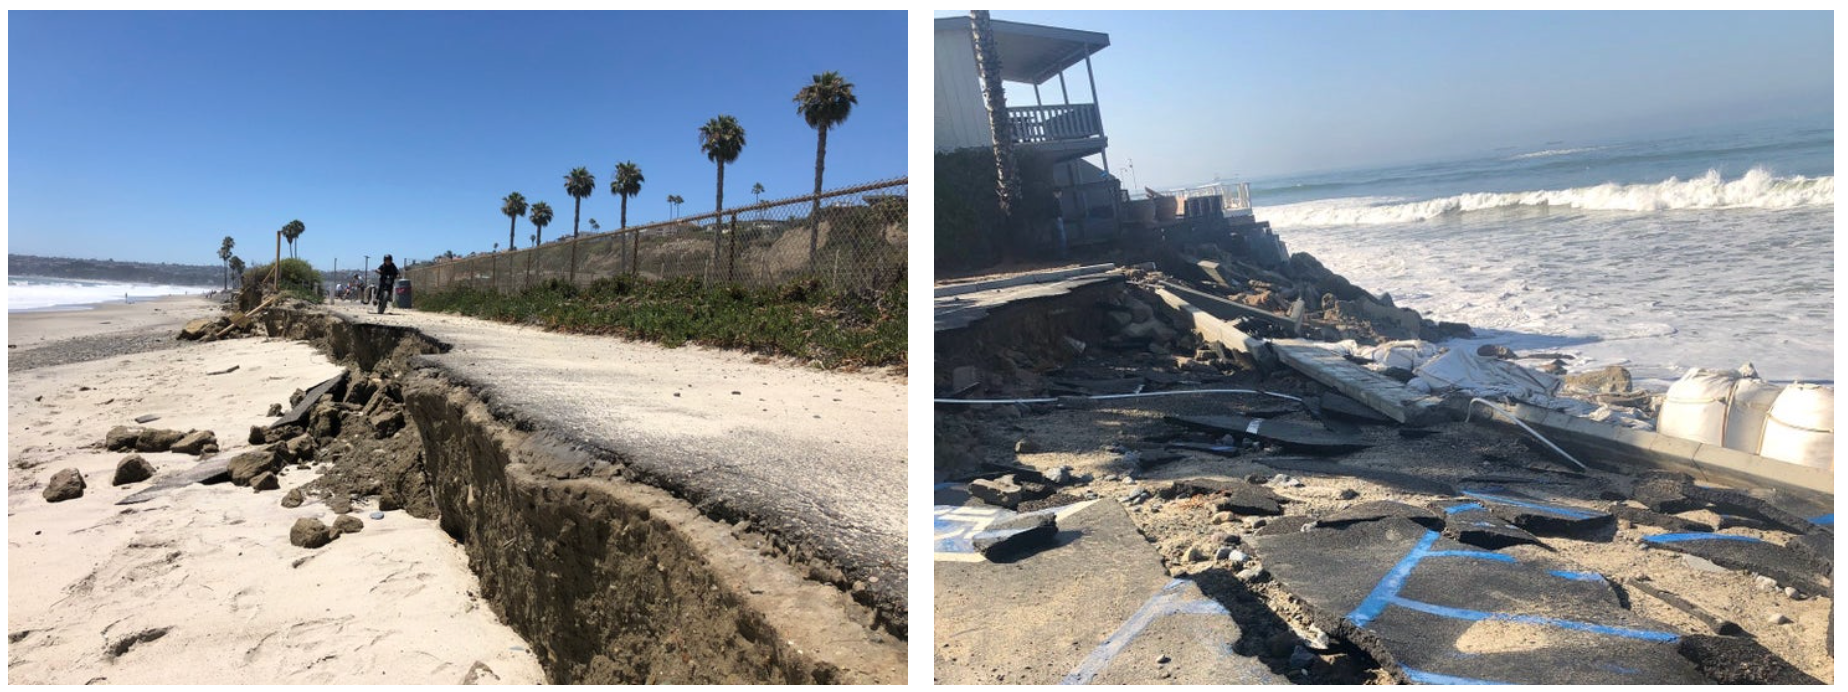 Recent storm surge destruction along Capistrano Beach from the early July 2020 storms.